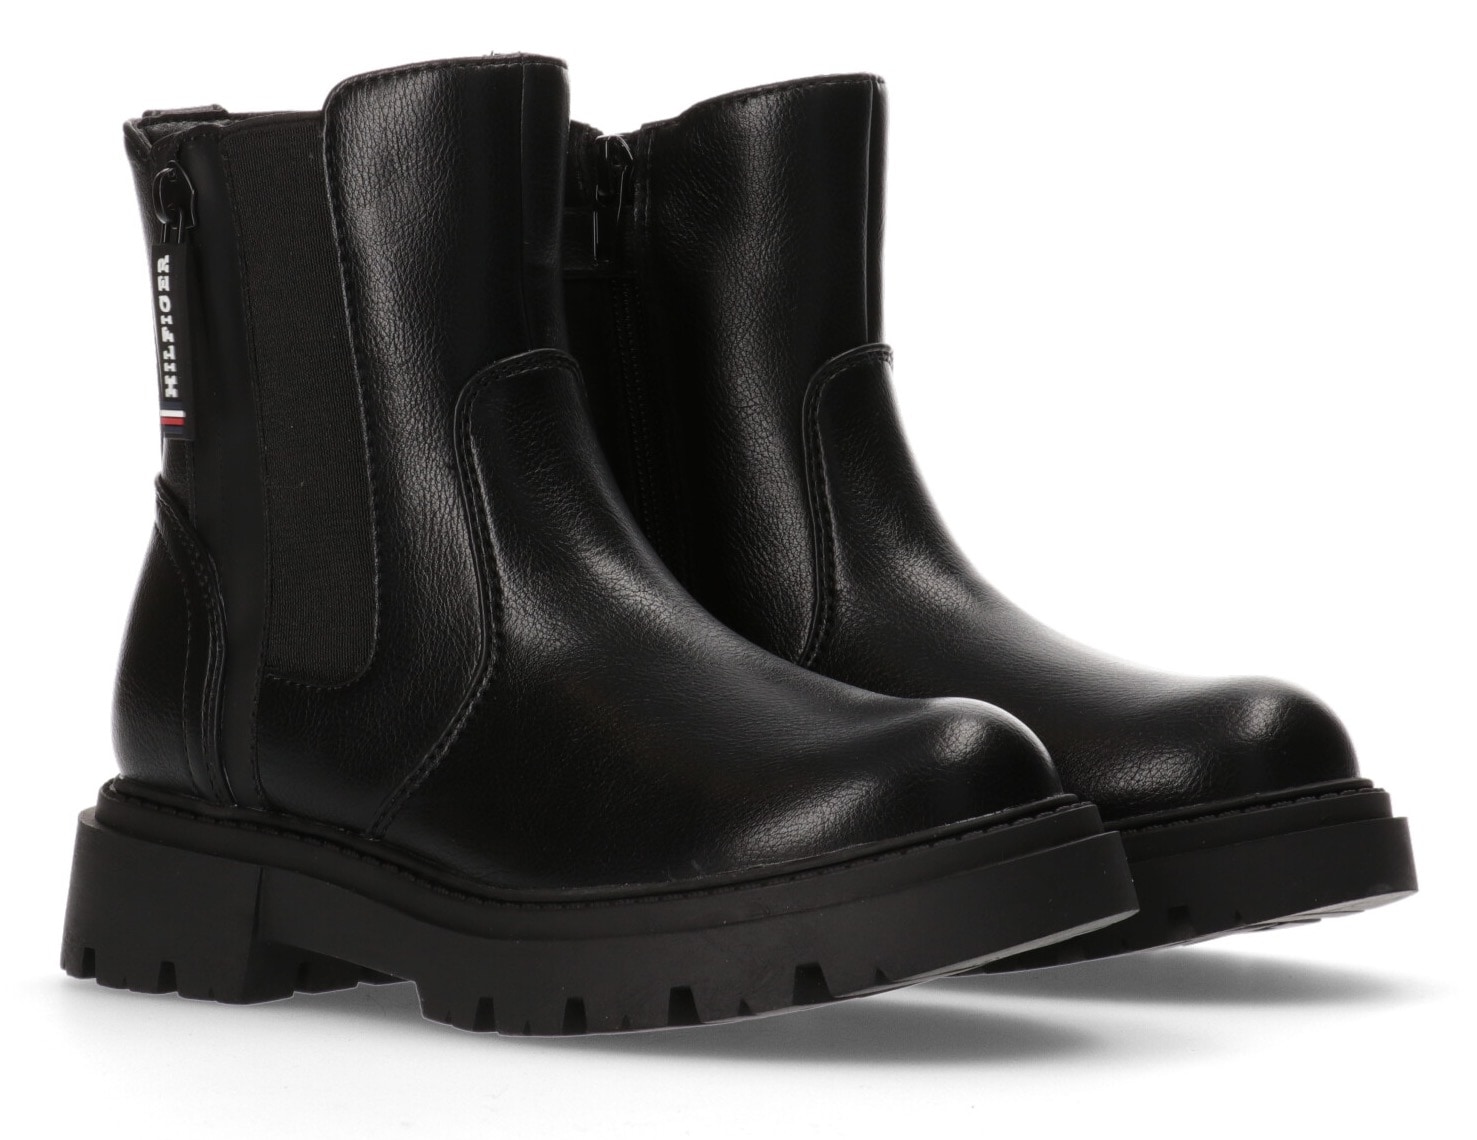 Chelseaboots »CHELSEA BOOT«, mit modischer Plateausohle